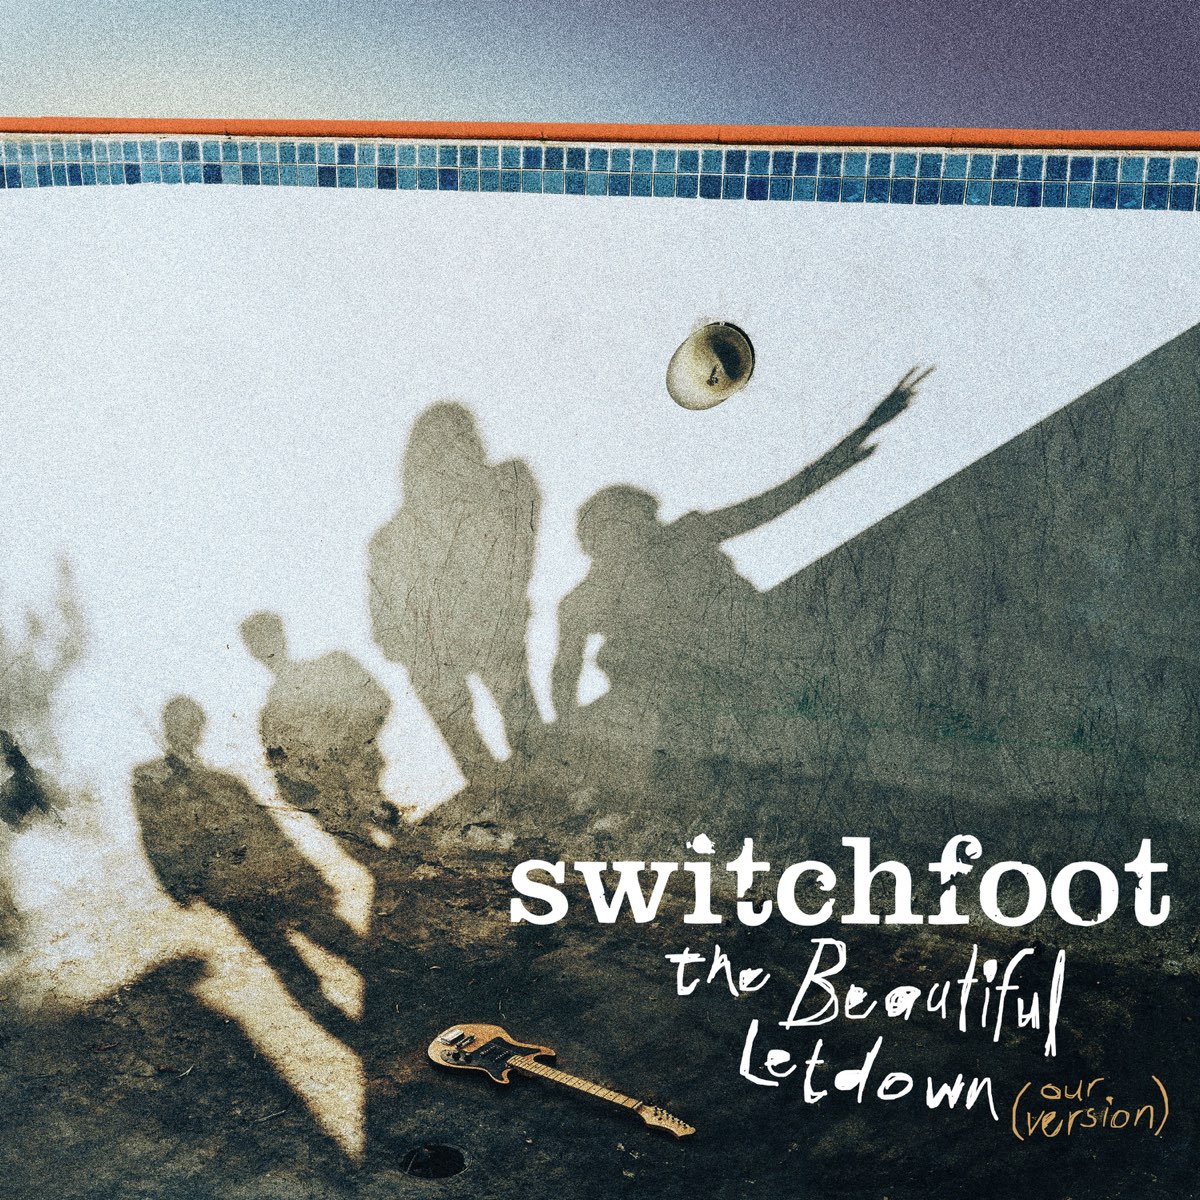 switchfoot tour beautiful letdown